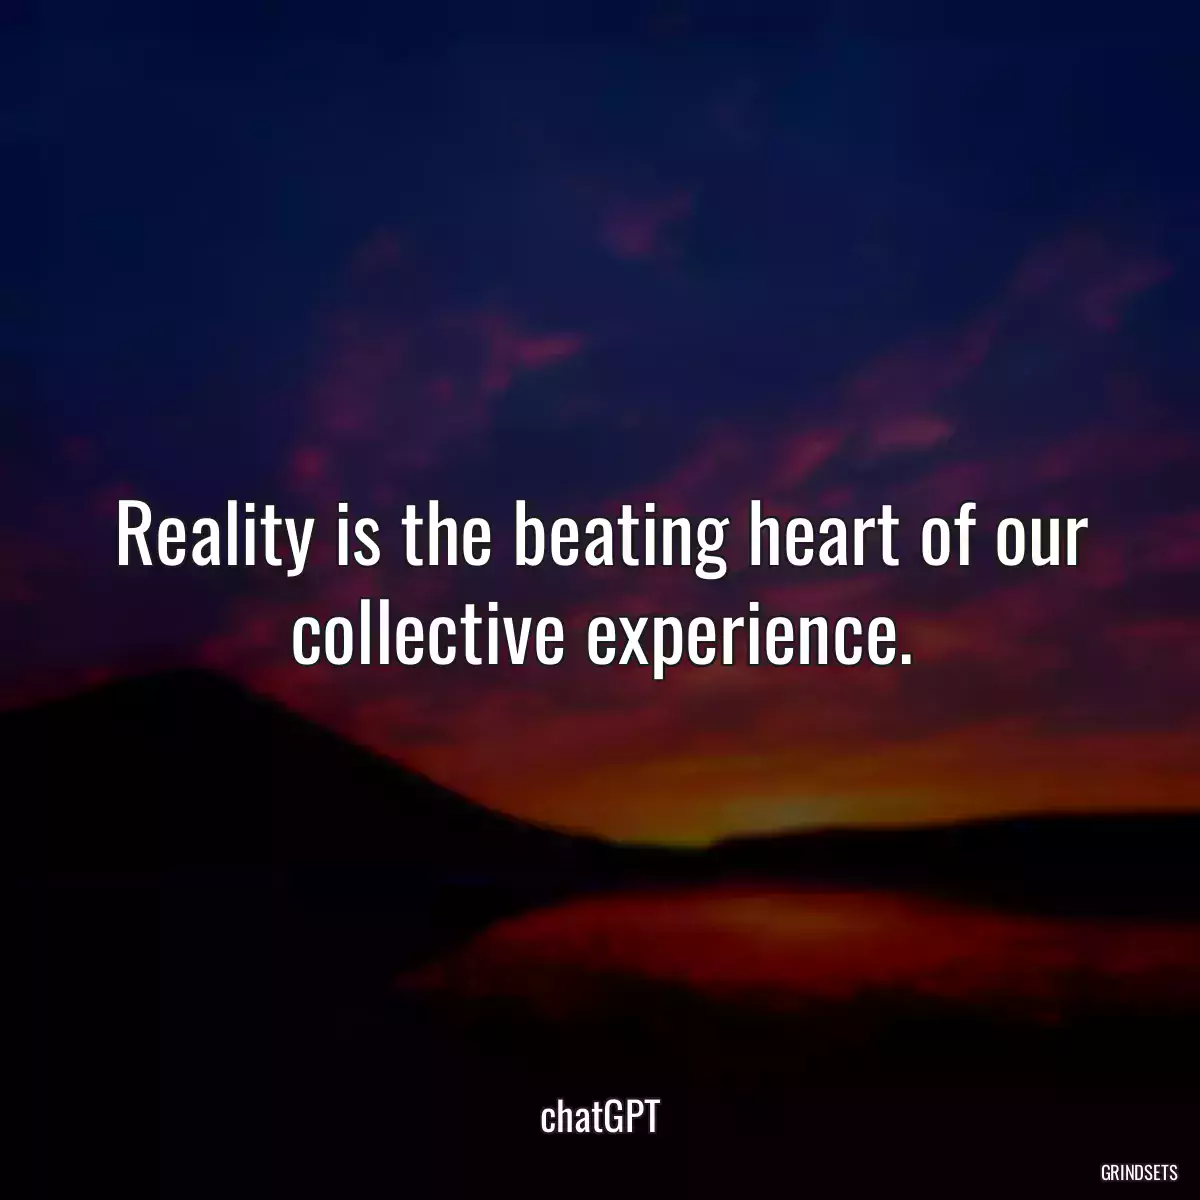 Reality is the beating heart of our collective experience.